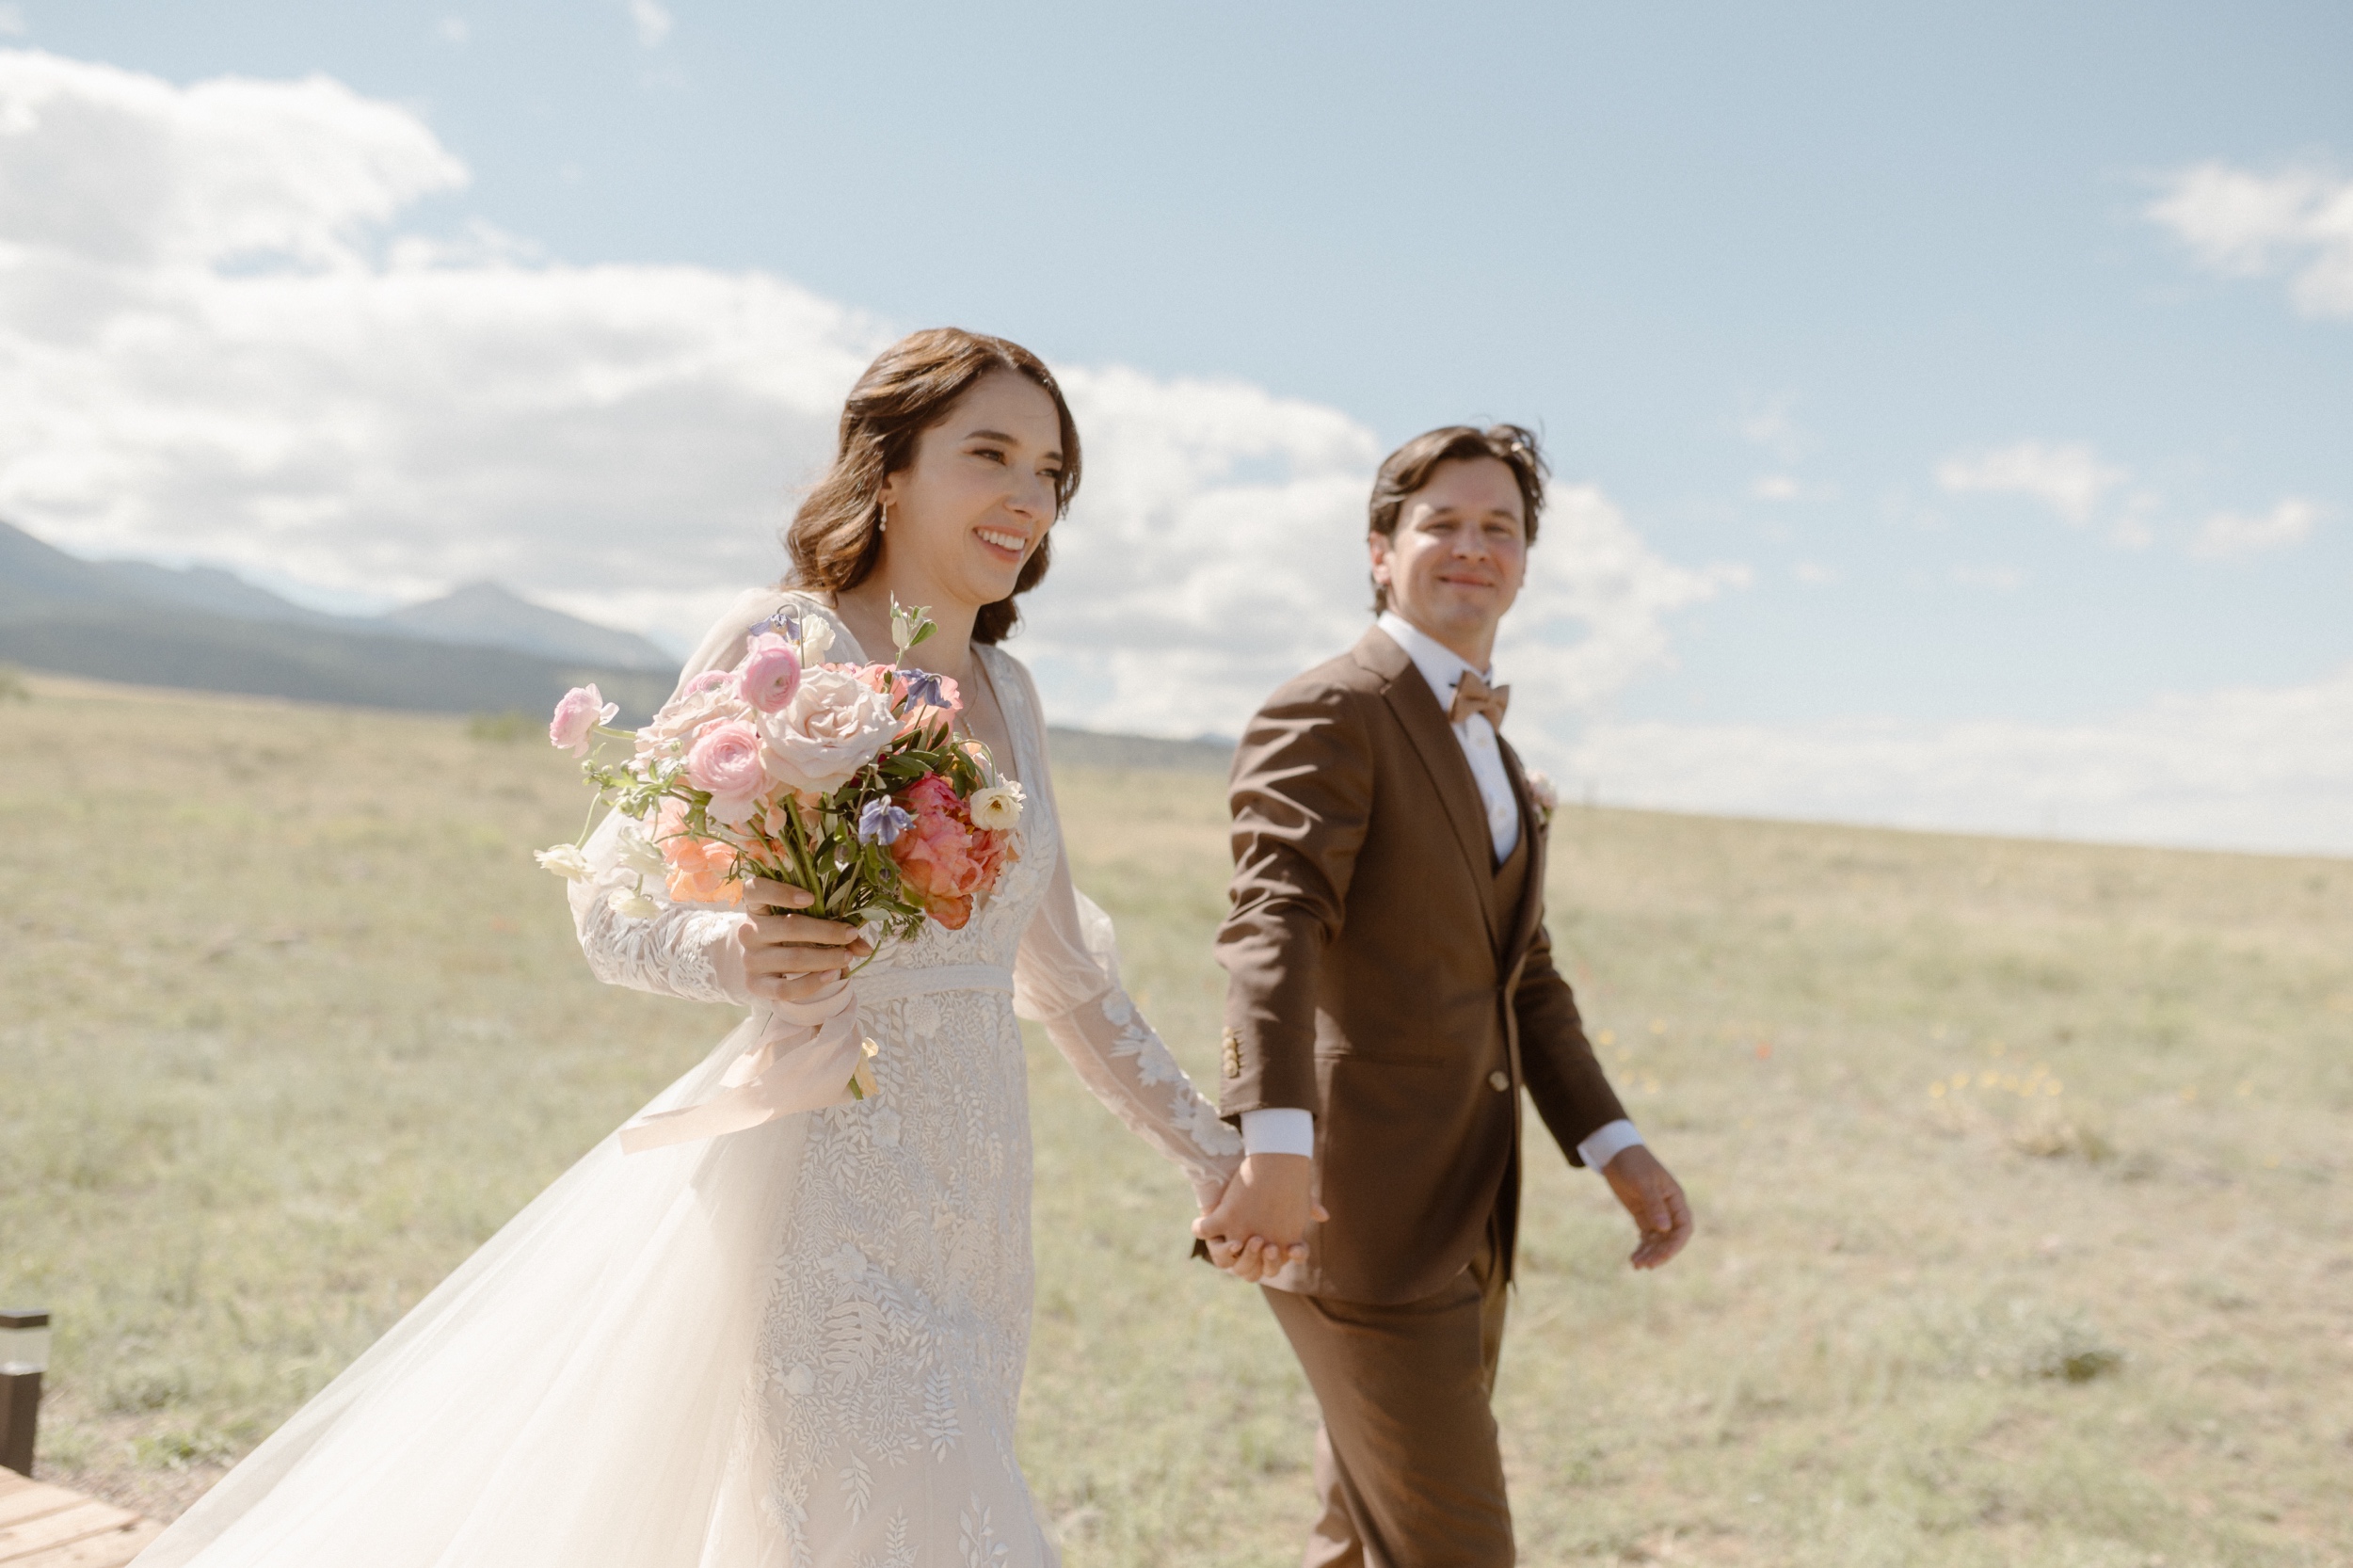 A bride and groom walk along a grassy field as they hold hands. Photo by Colorado wedding photographer Ashley Joyce.